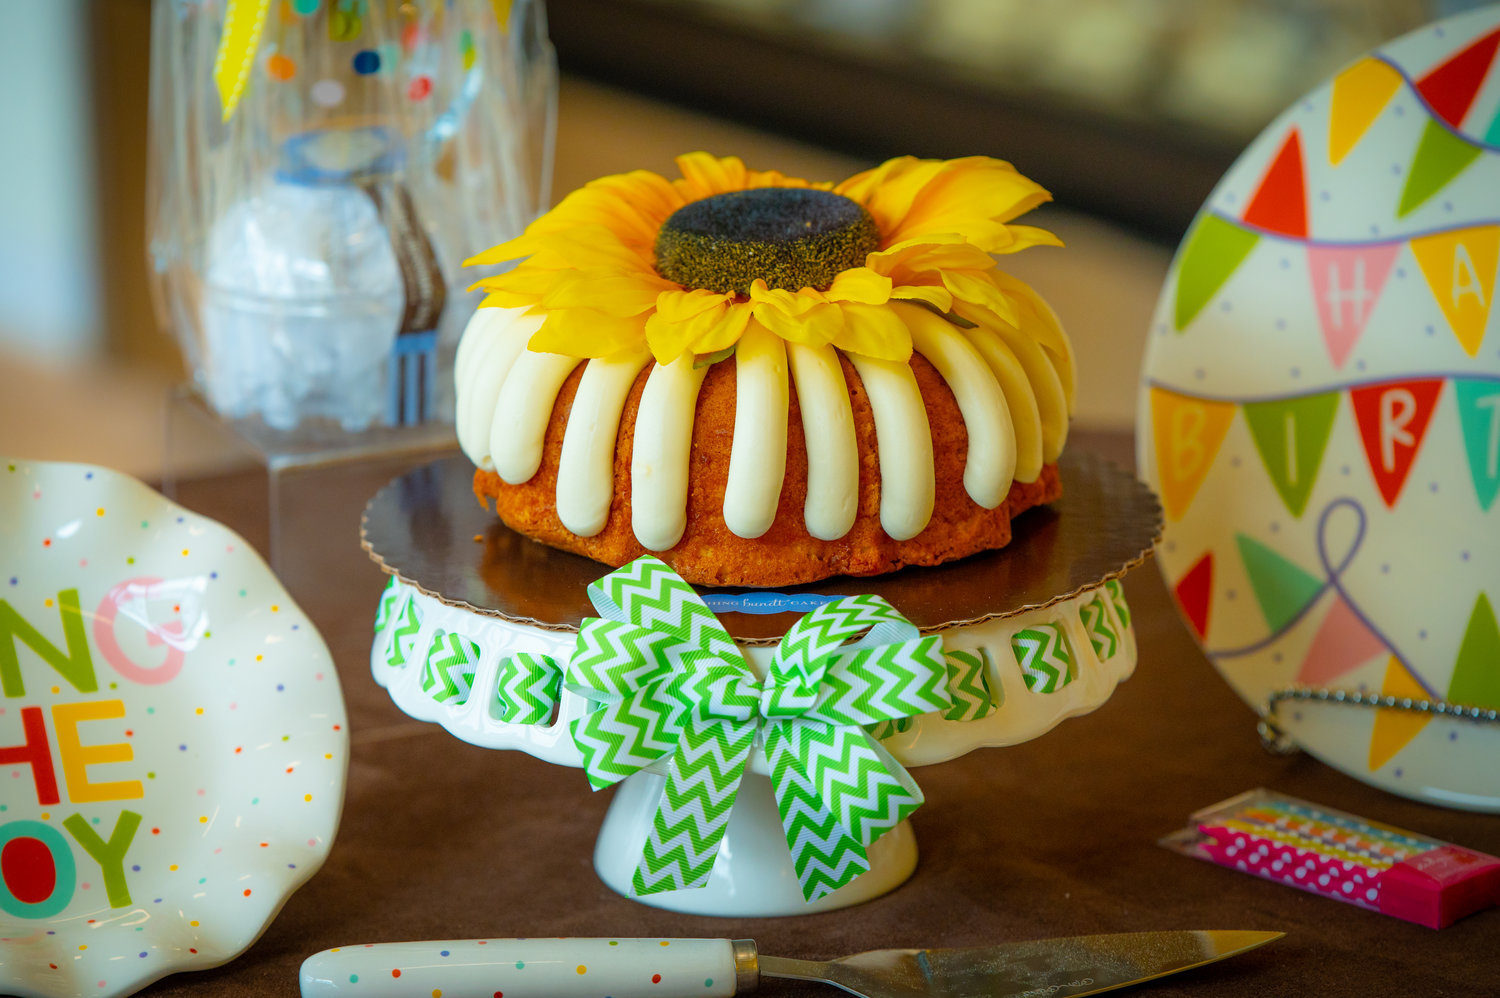 Add a little sunshine to someone's day with a specialty cake from Nothing Bundt Cakes Gainesville-Haymarket.